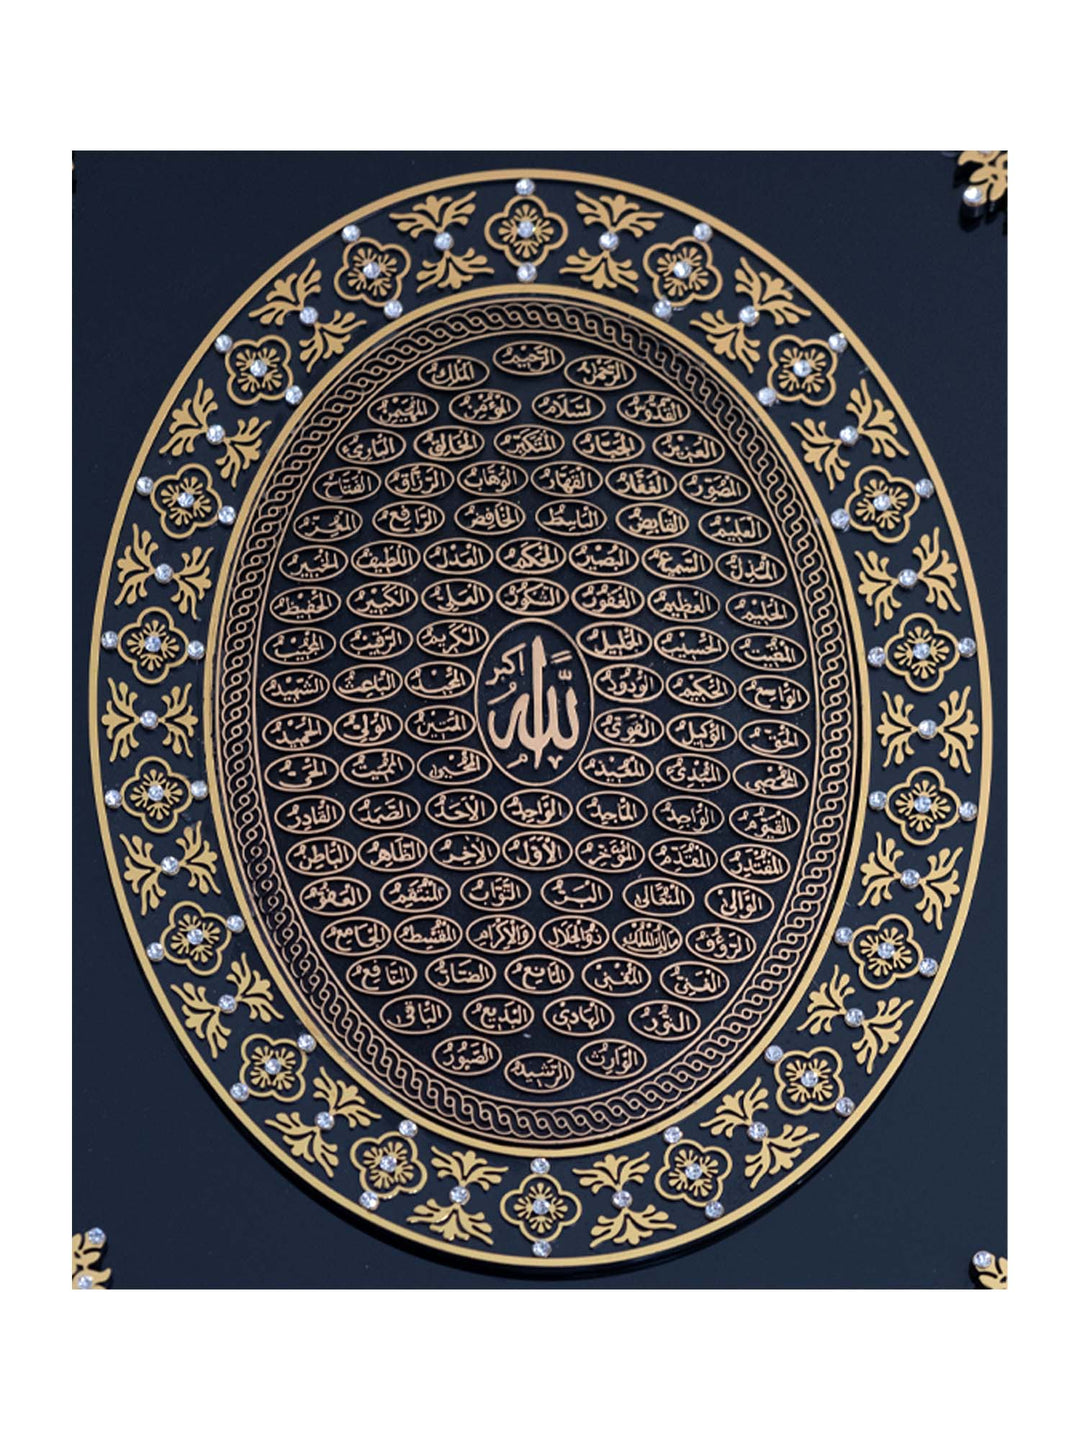 99 Names of Allah Frame with Ayatul Kursi - Mirrored finish Oval with Pattern